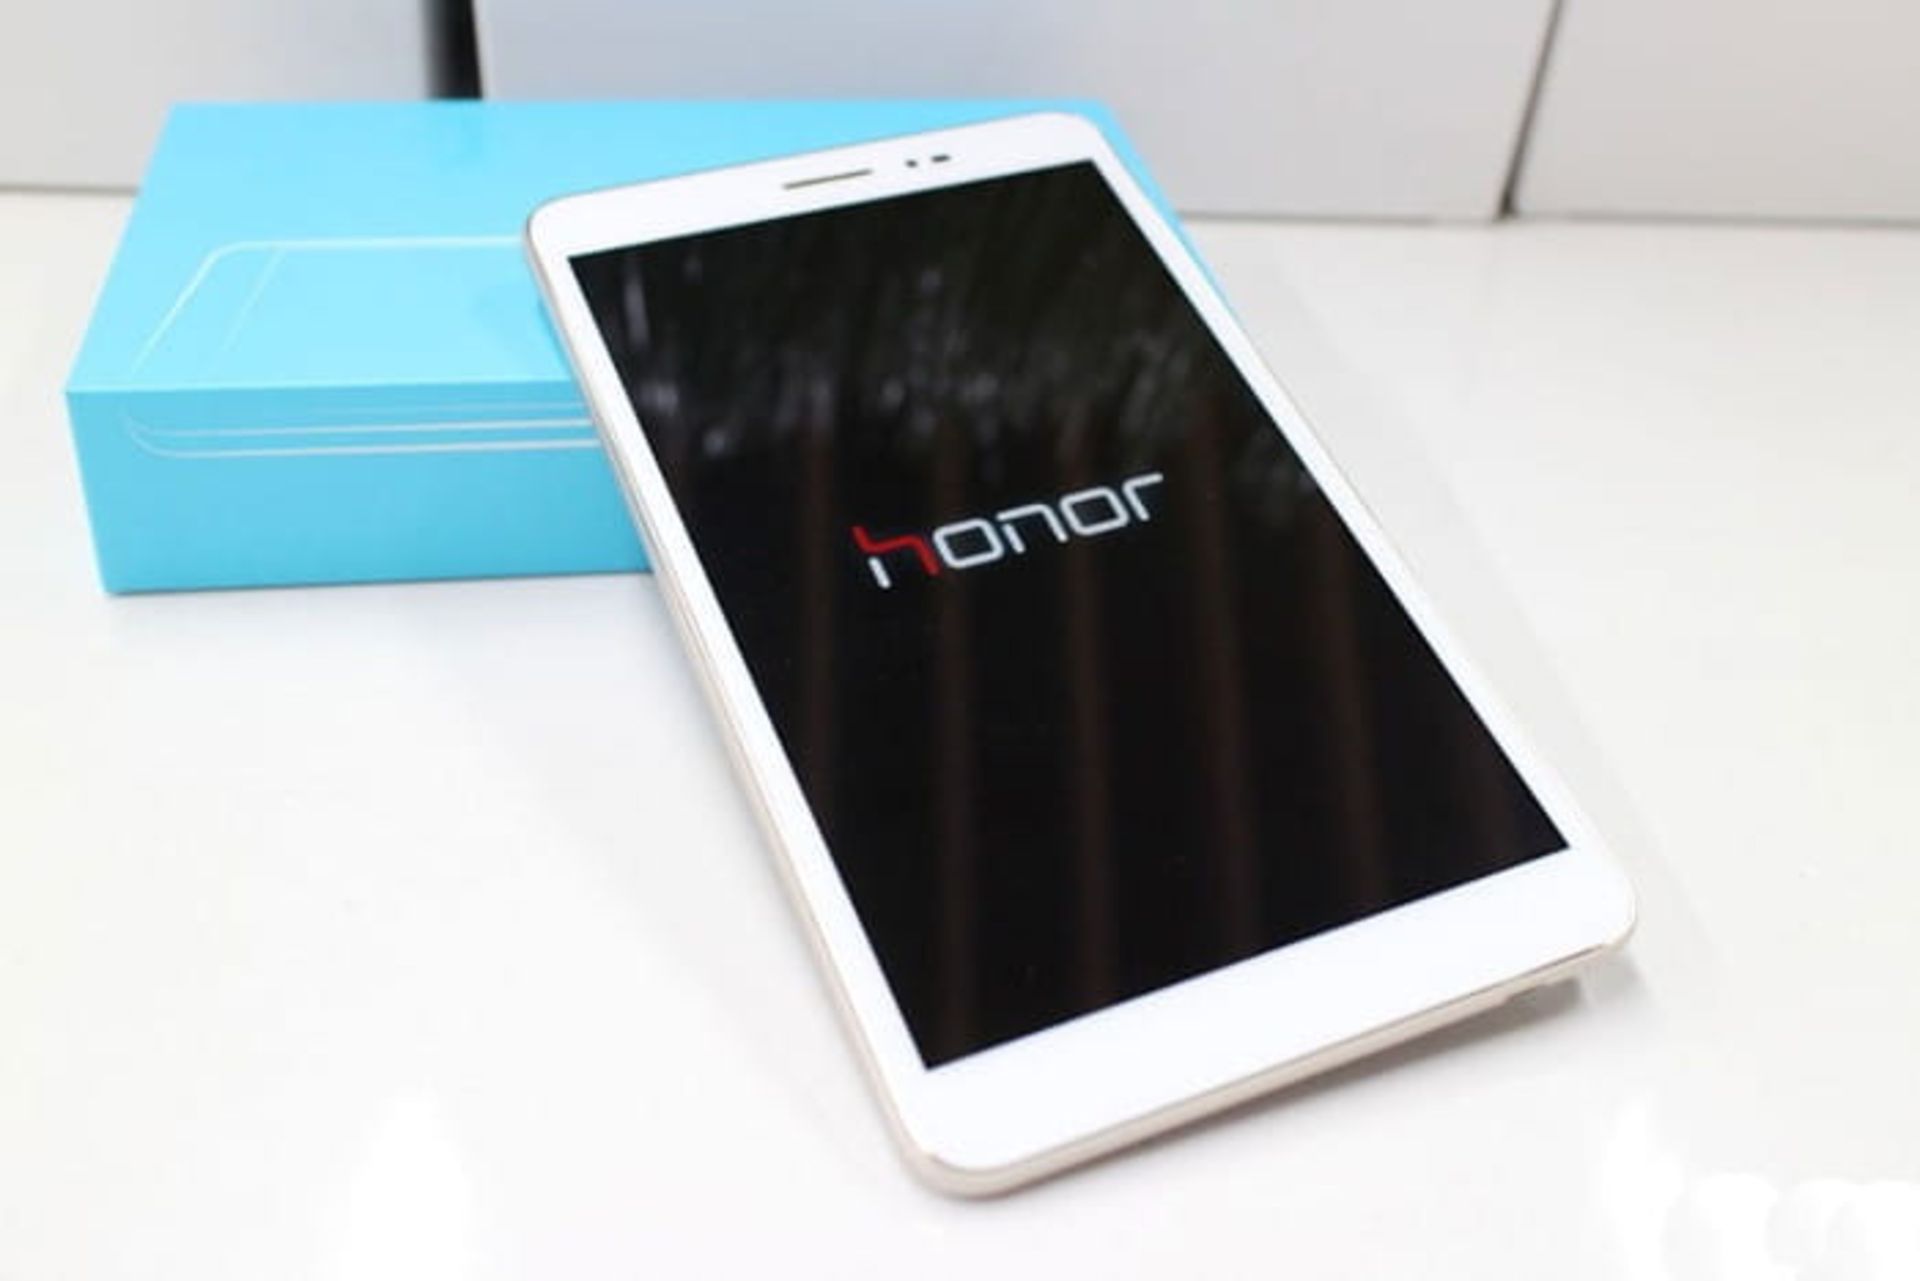 honor announces the Media Pad 2 tablet and Watch S1